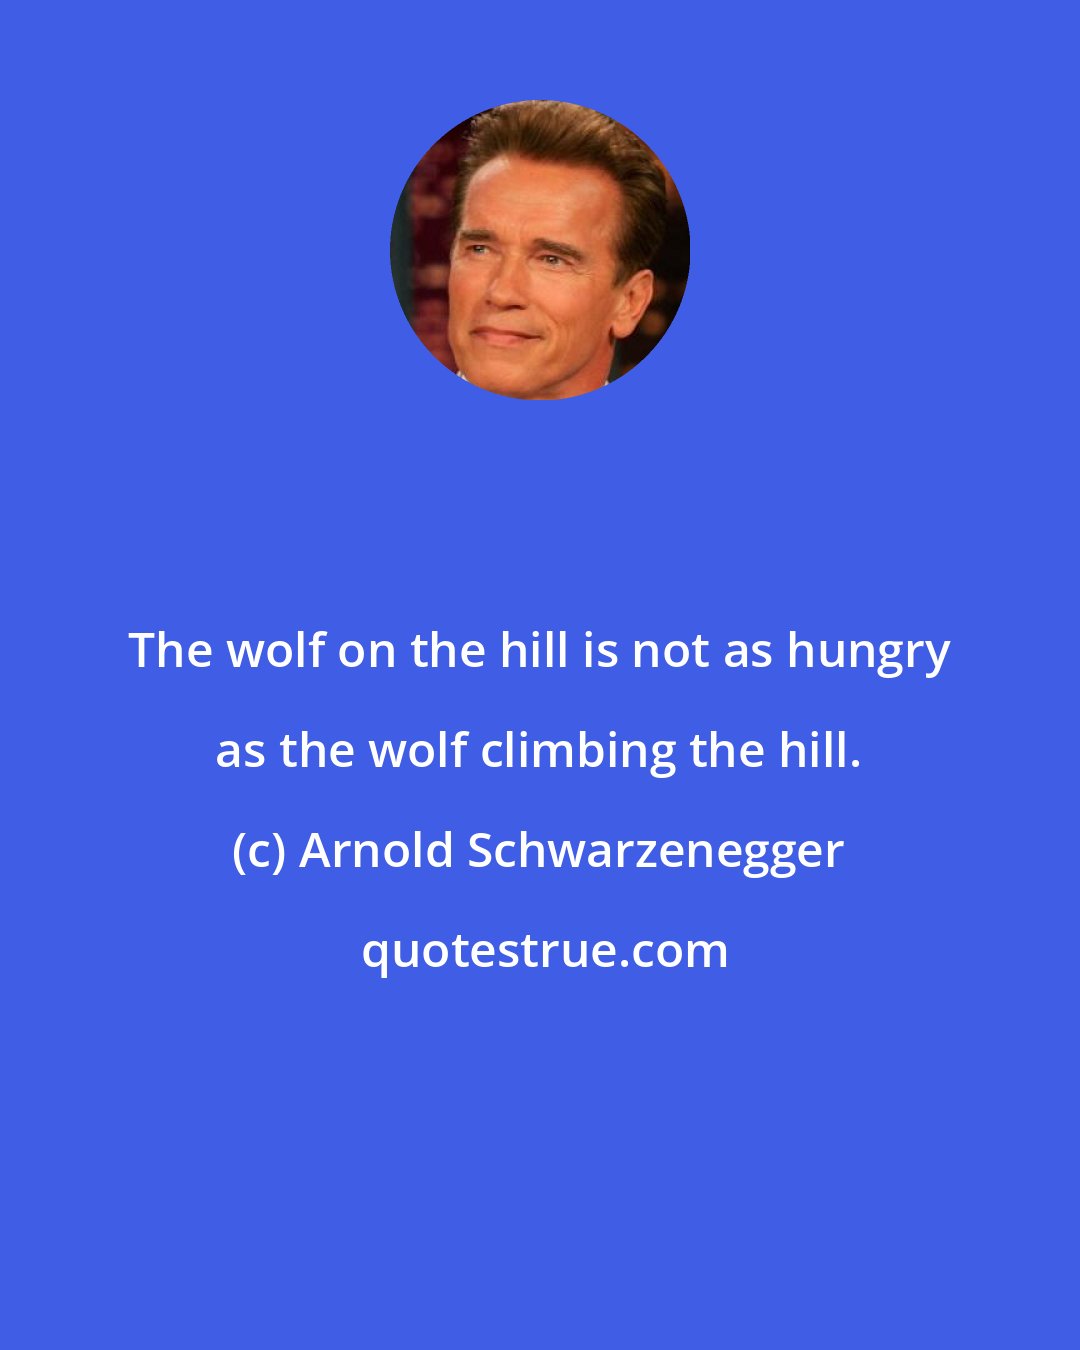 Arnold Schwarzenegger: The wolf on the hill is not as hungry as the wolf climbing the hill.